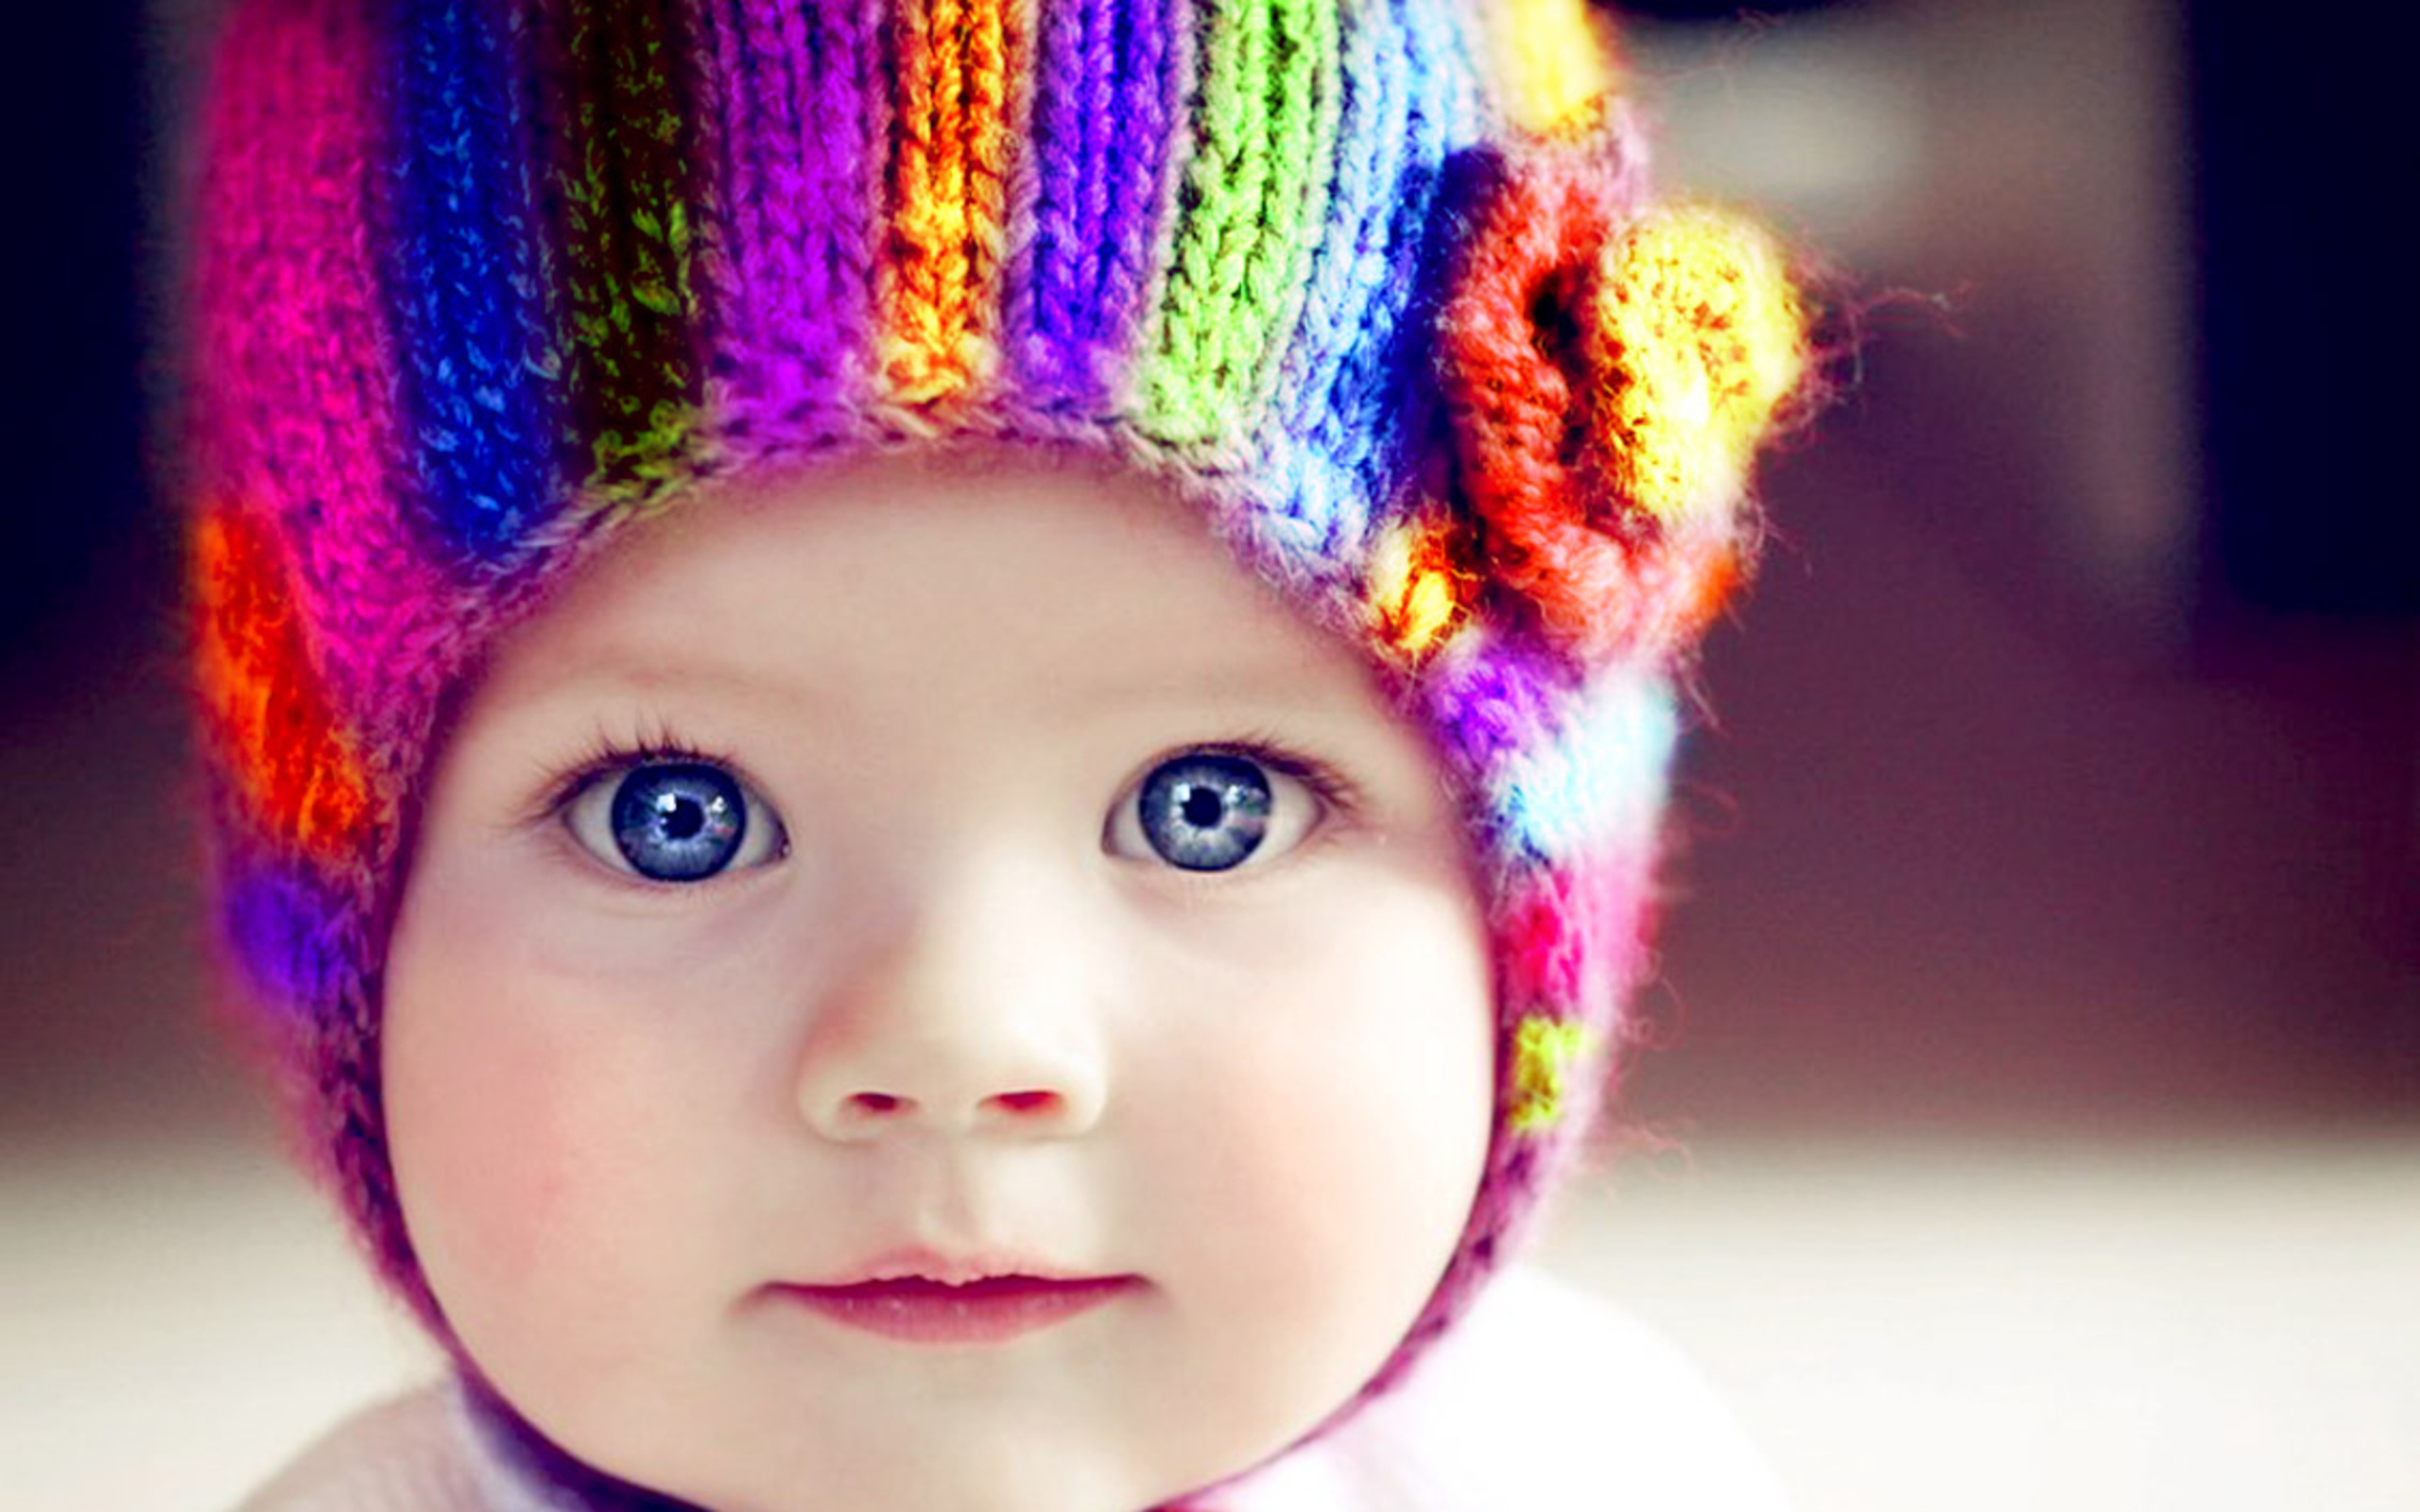 Cute Baby Background - Wallpaper, High Definition, High Quality, Widescreen